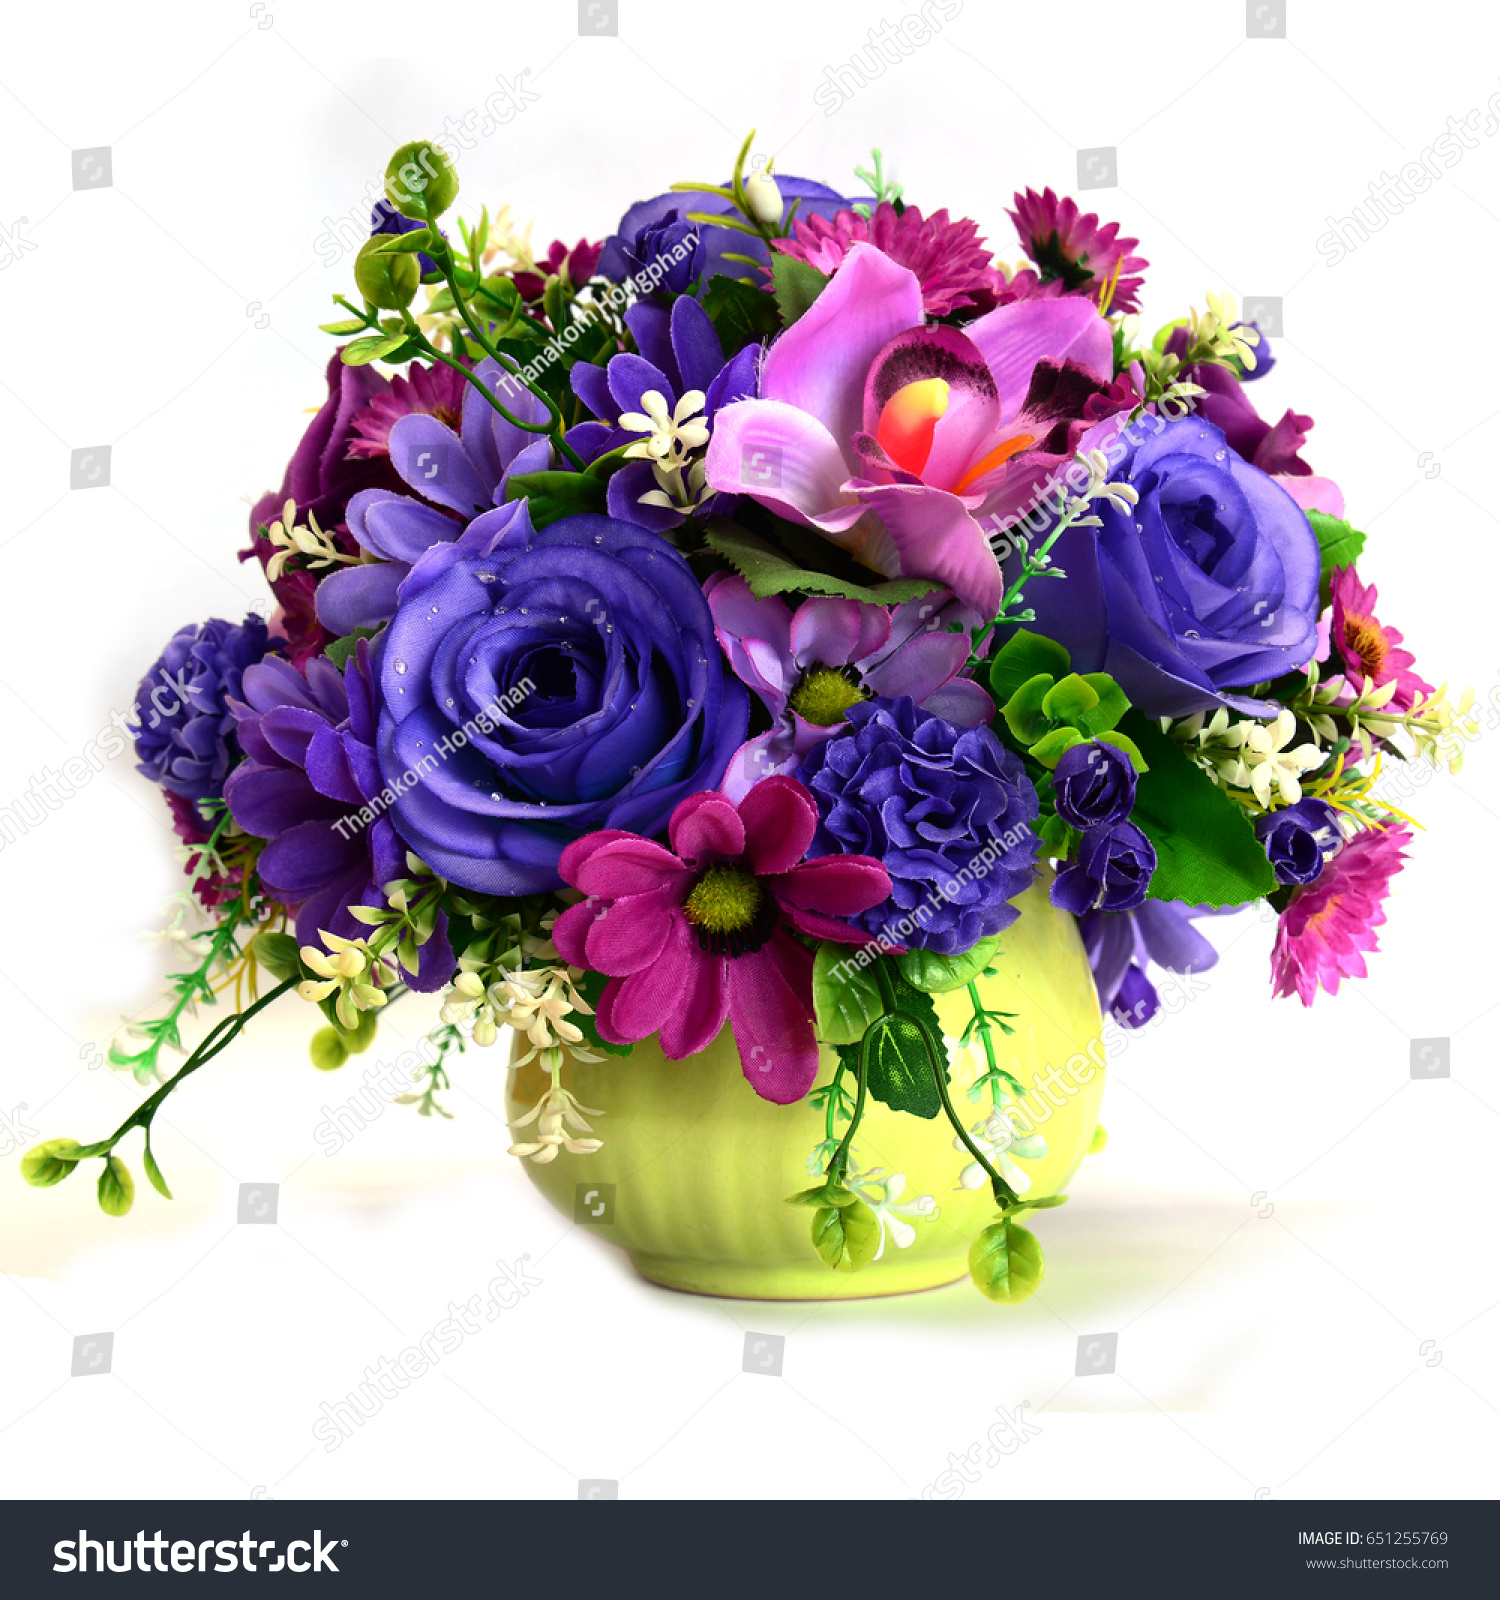 Flowers in vase isolated in white background #651255769